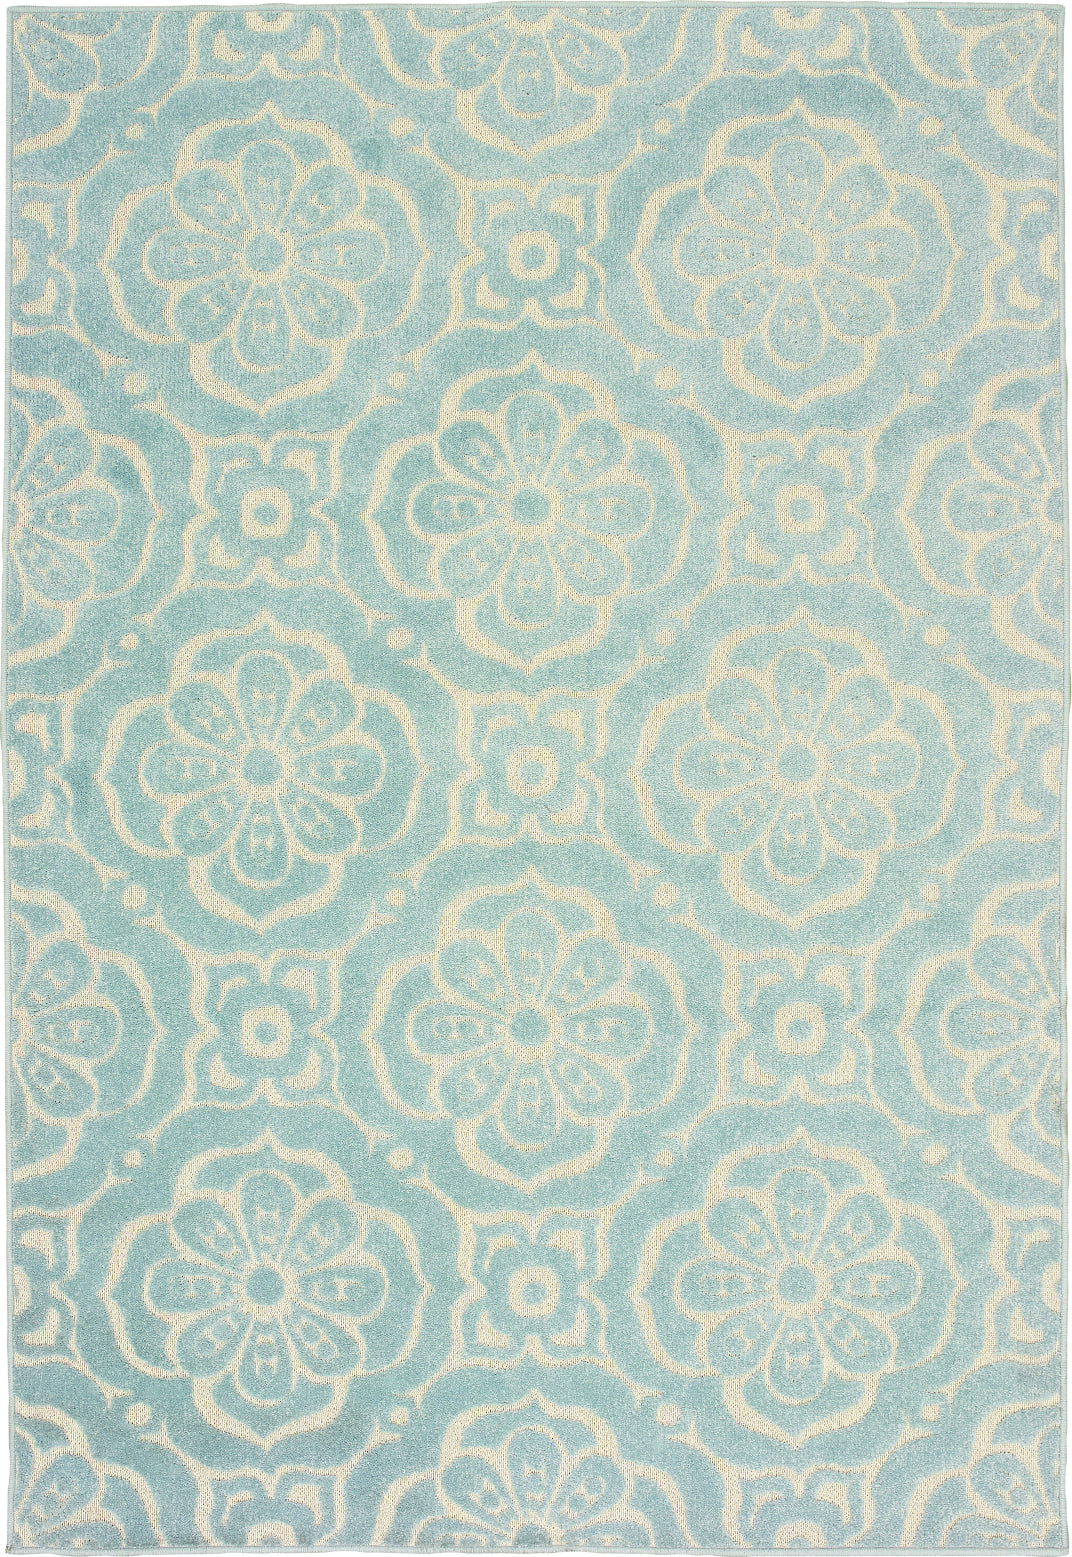 Oriental Weavers Barbados 539L4 Blue/Ivory Area Rug main image featured